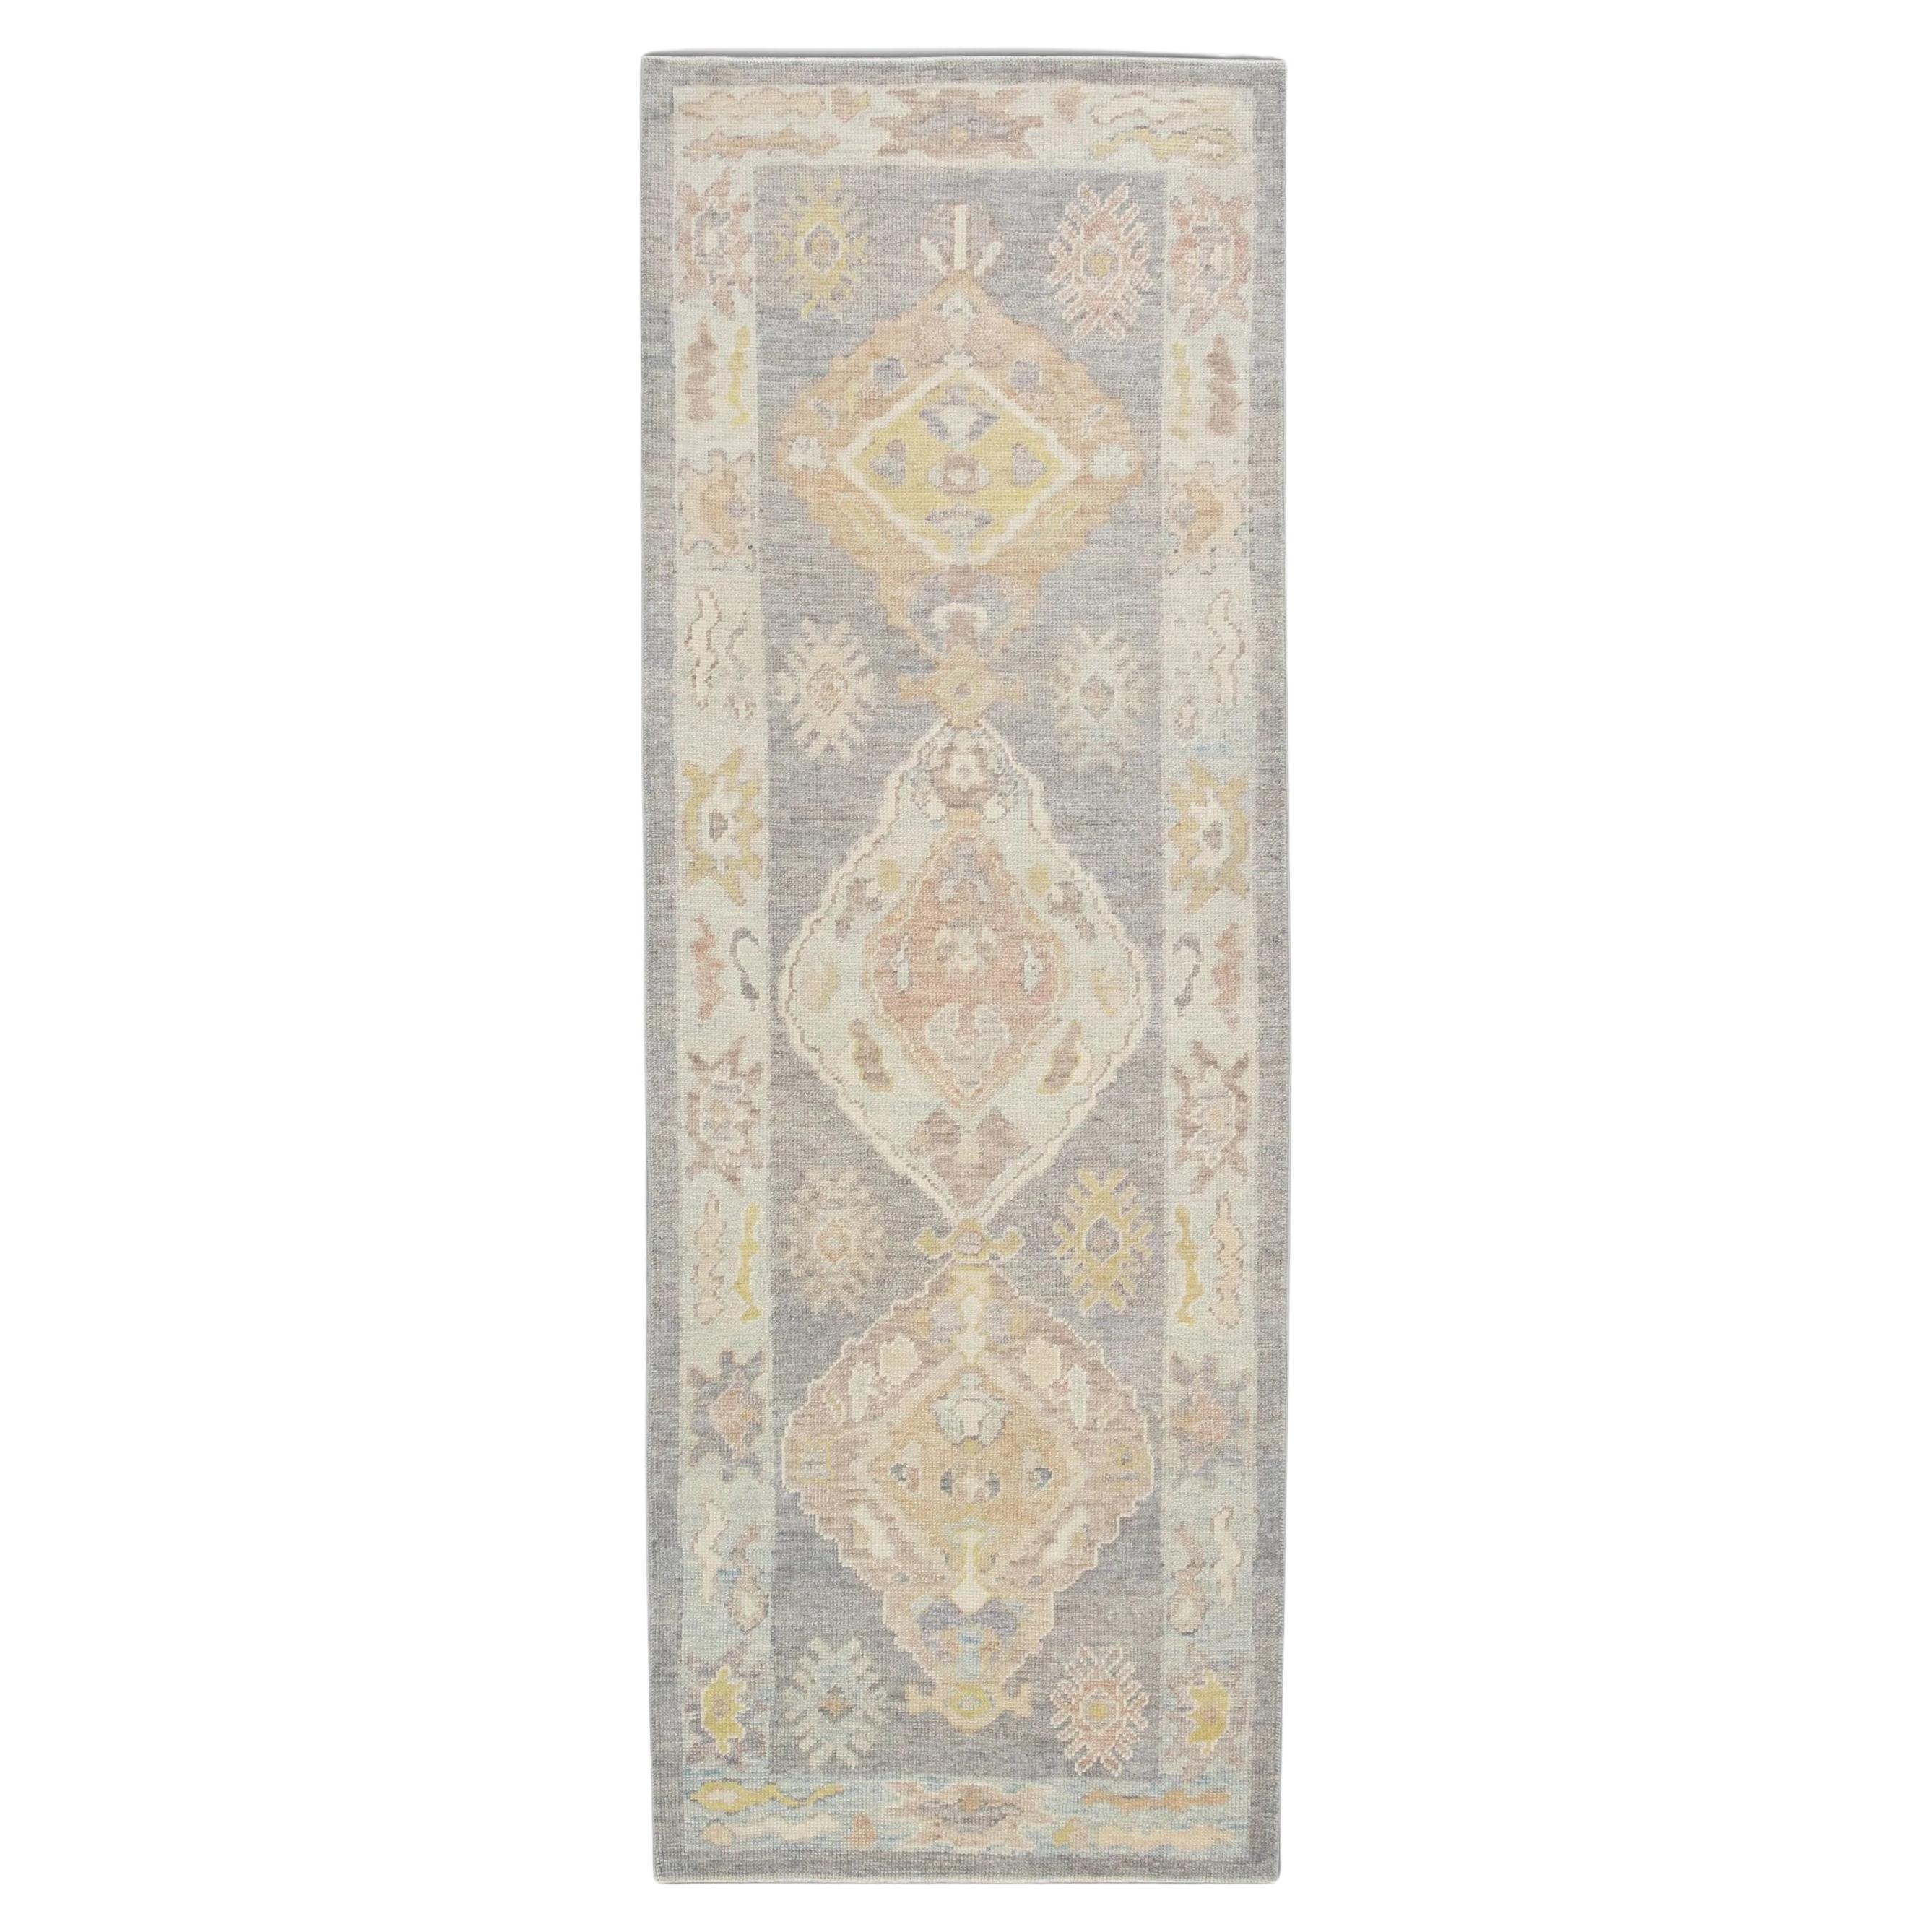 Handwoven Wool Soft Purple Floral Turkish Oushak Rug 3'1" x 8'6" For Sale